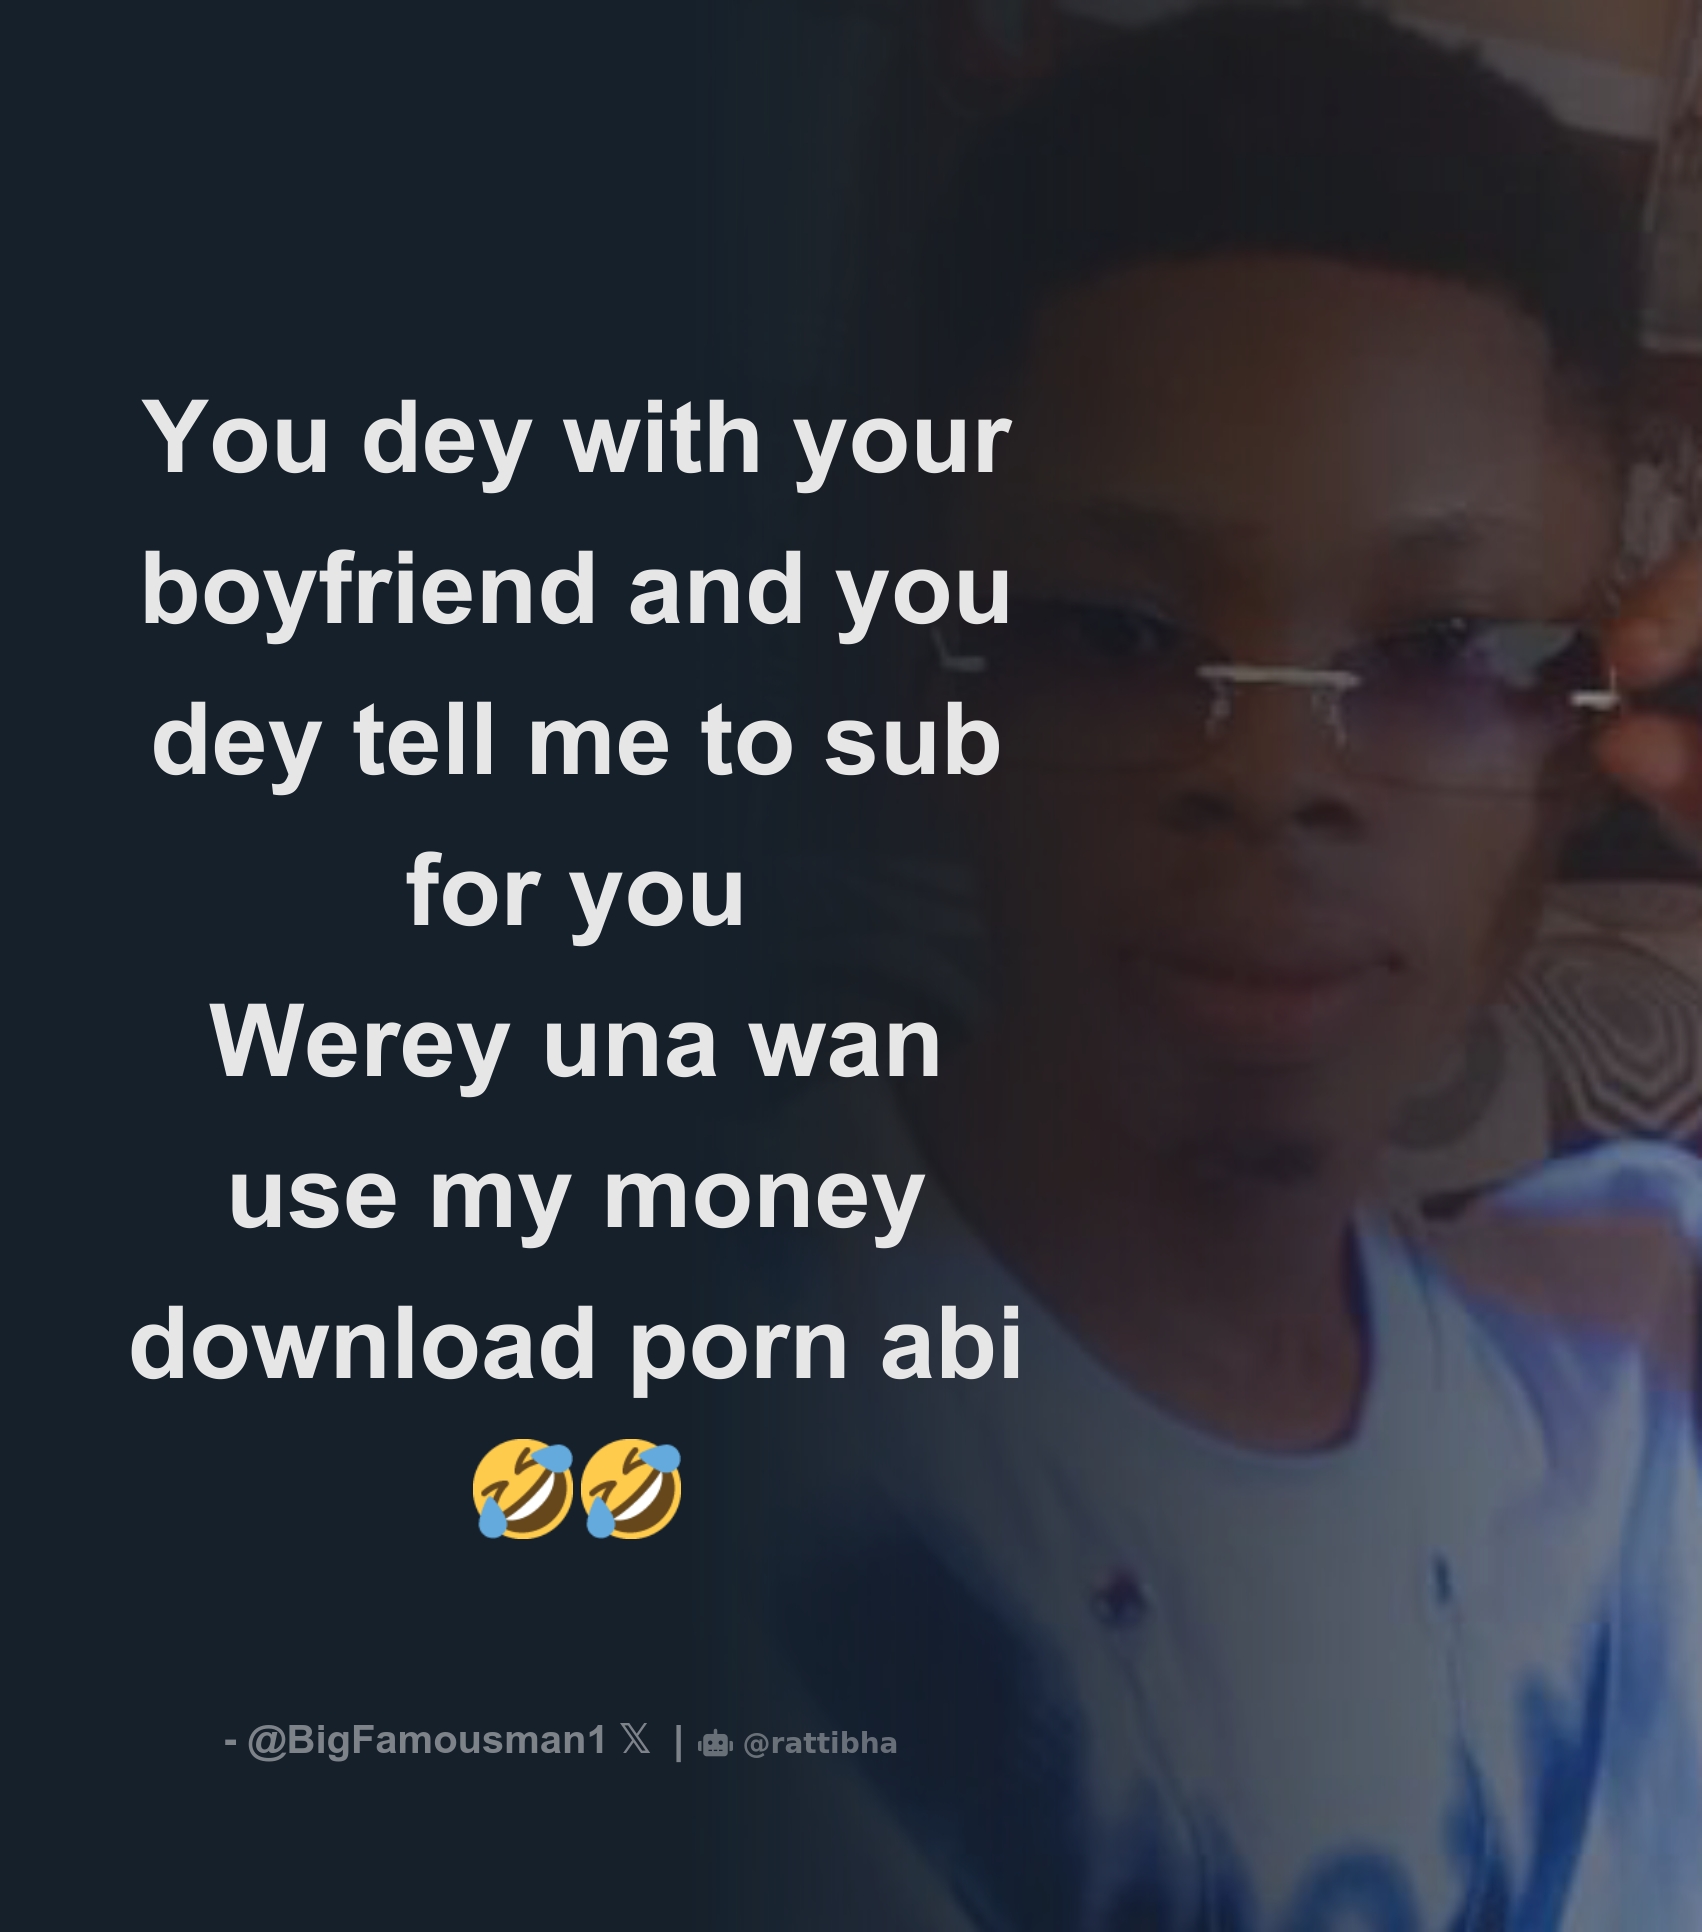 1702px x 1932px - You dey with your boyfriend and you dey tell me to sub for you Werey una  wan use my money download porn abi ðŸ¤£ðŸ¤£ - Thread from Big Famous  @BigFamous001 - Rattibha